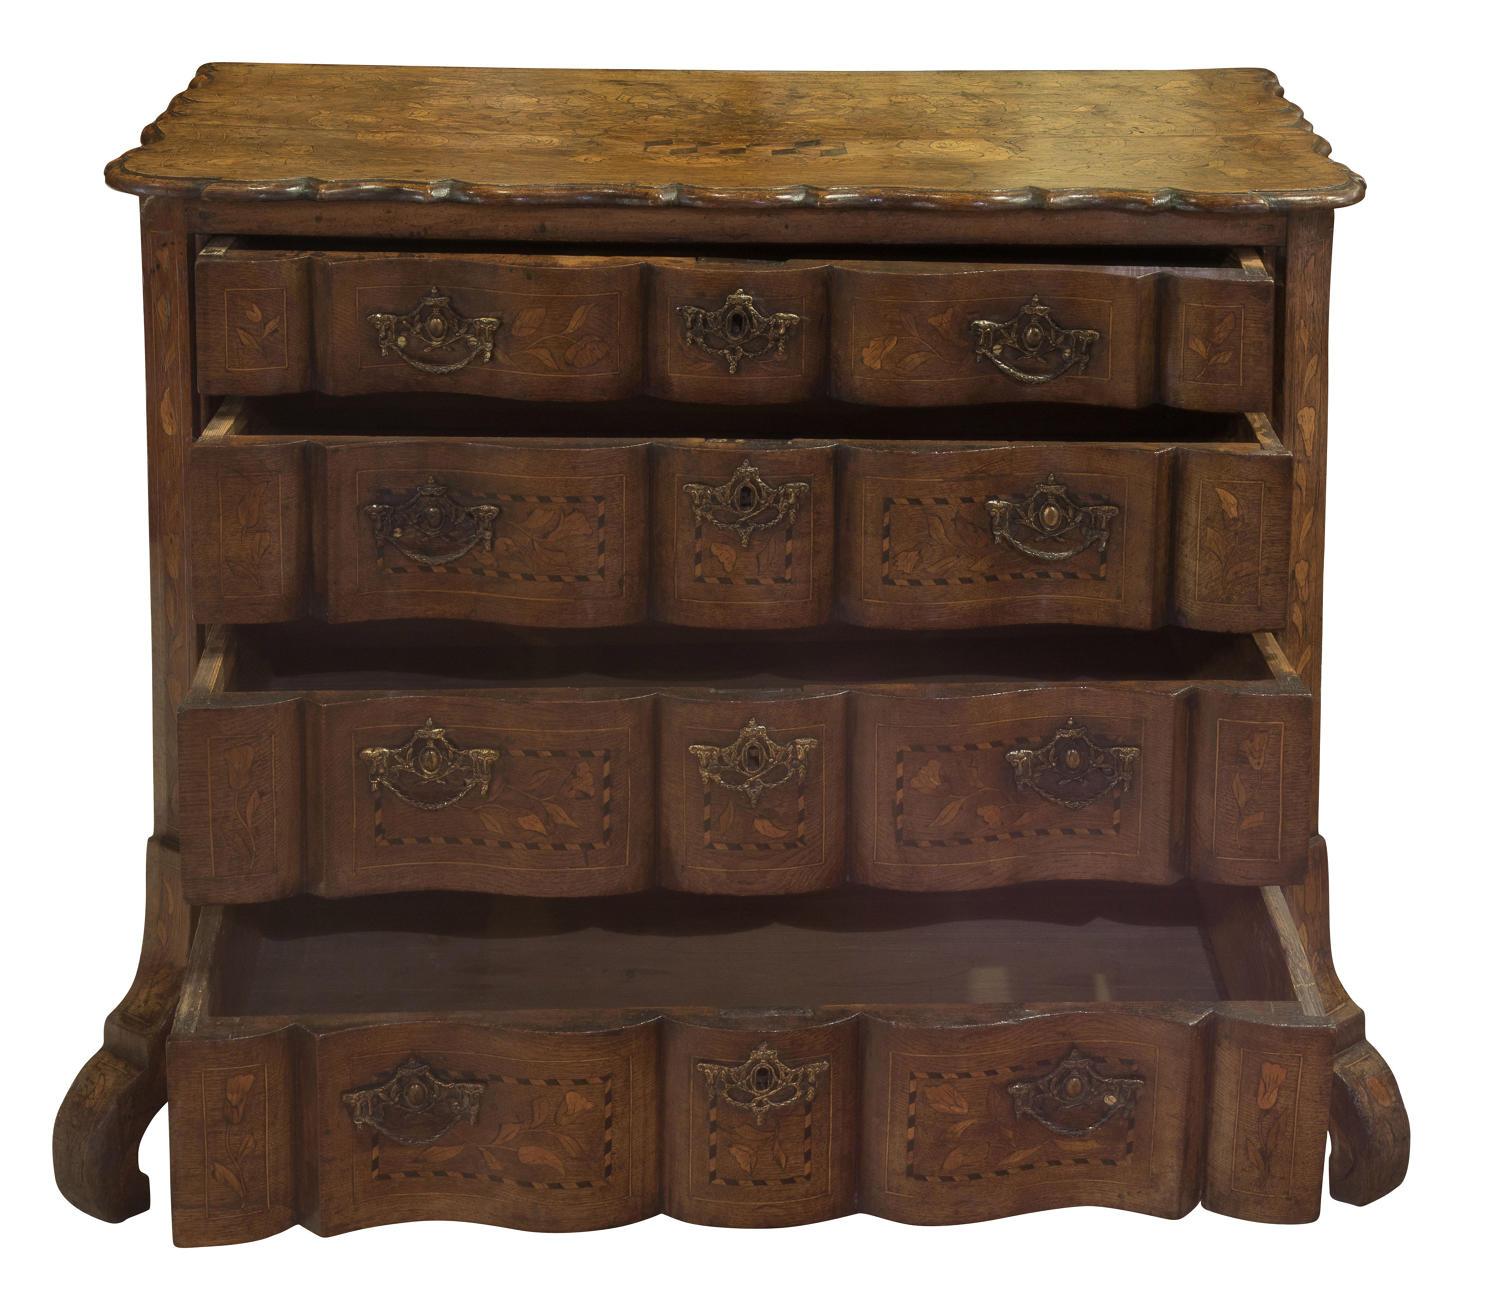 European Dutch Bombe Chest of Drawers with Inlaid Foliate and Avian Motifs in Marquetry For Sale